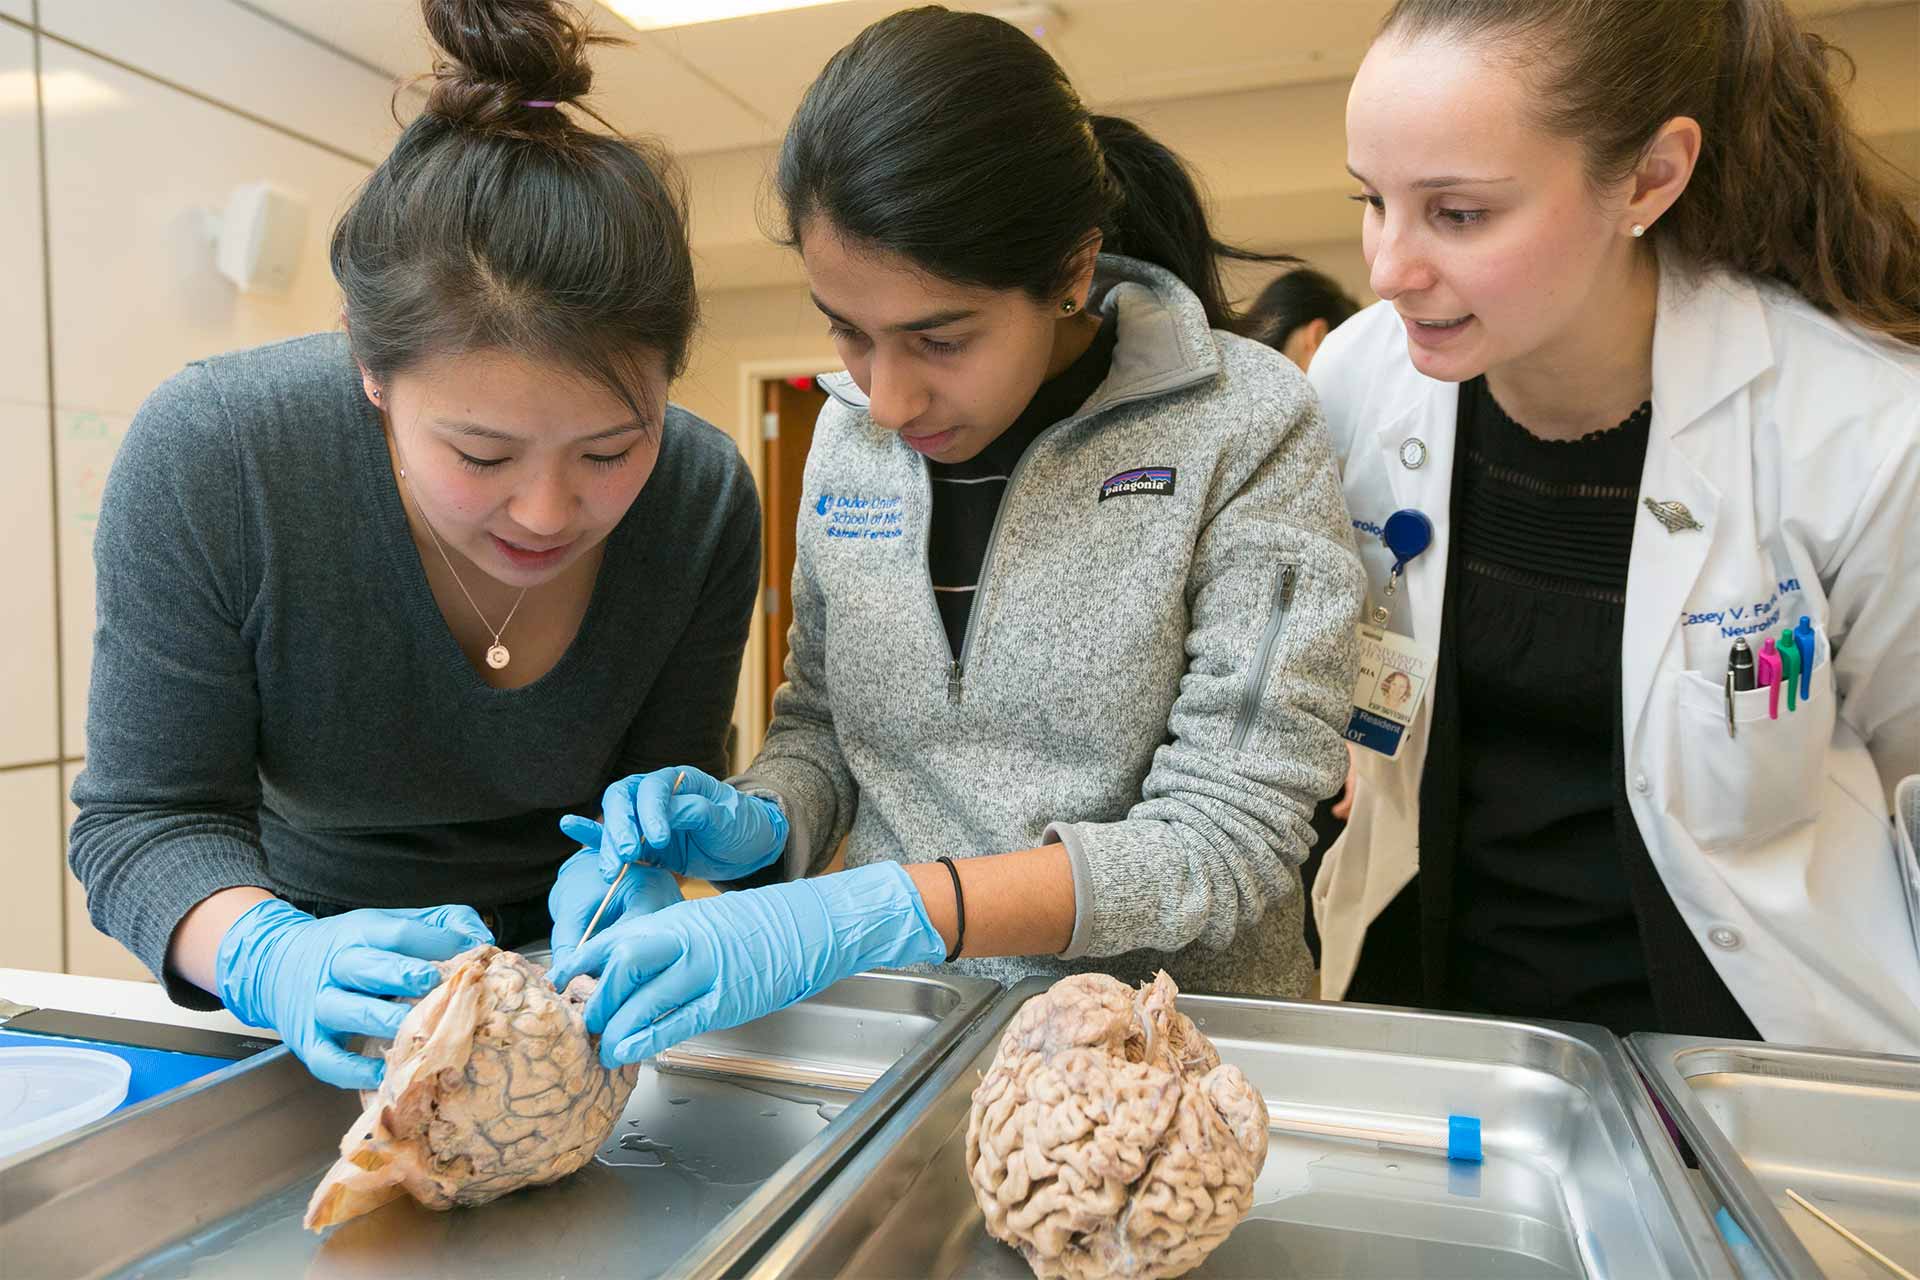 Neurology resident Casey Farin, MD, right, teaches Duke first-year medical students Christine Wu, left, and Sammi Fernandes (cq) about the anatomy of the cerebral cortex and the blood vessels that supply blood to the brain during a wet-lab experience with human brain specimens in the Trent Semans Center.